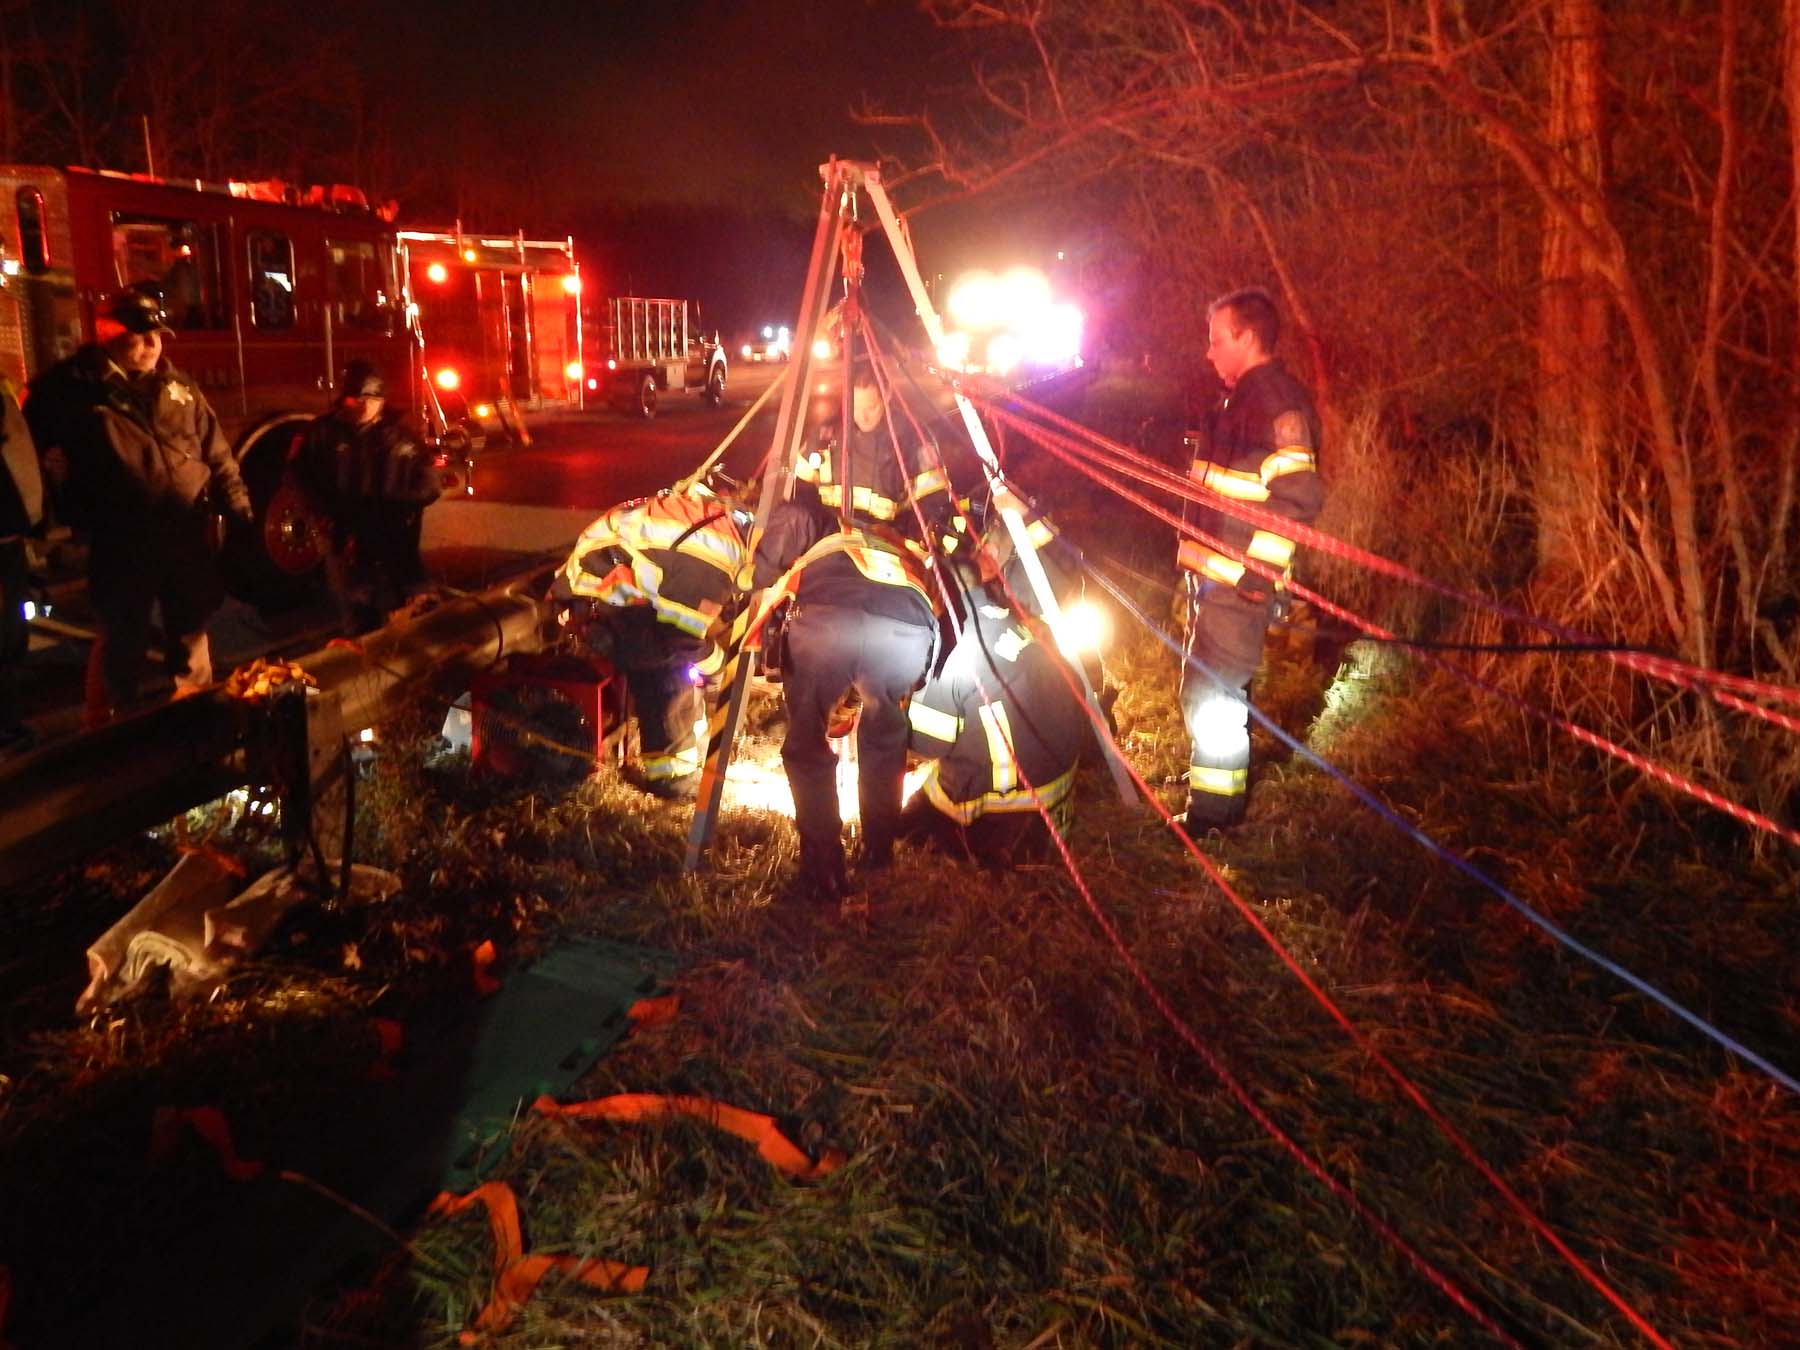 Orland Fire Protection District emergency rescue crews work to remove a man from a sewer pipe at about 145th and Harlem Avenue on Saturday night, Dec. 27, 2014. The man was walking along the forest preserve district returning to his car at 151st Street when he fell 20 feet down into the sewer pipe, using his phone to call 911